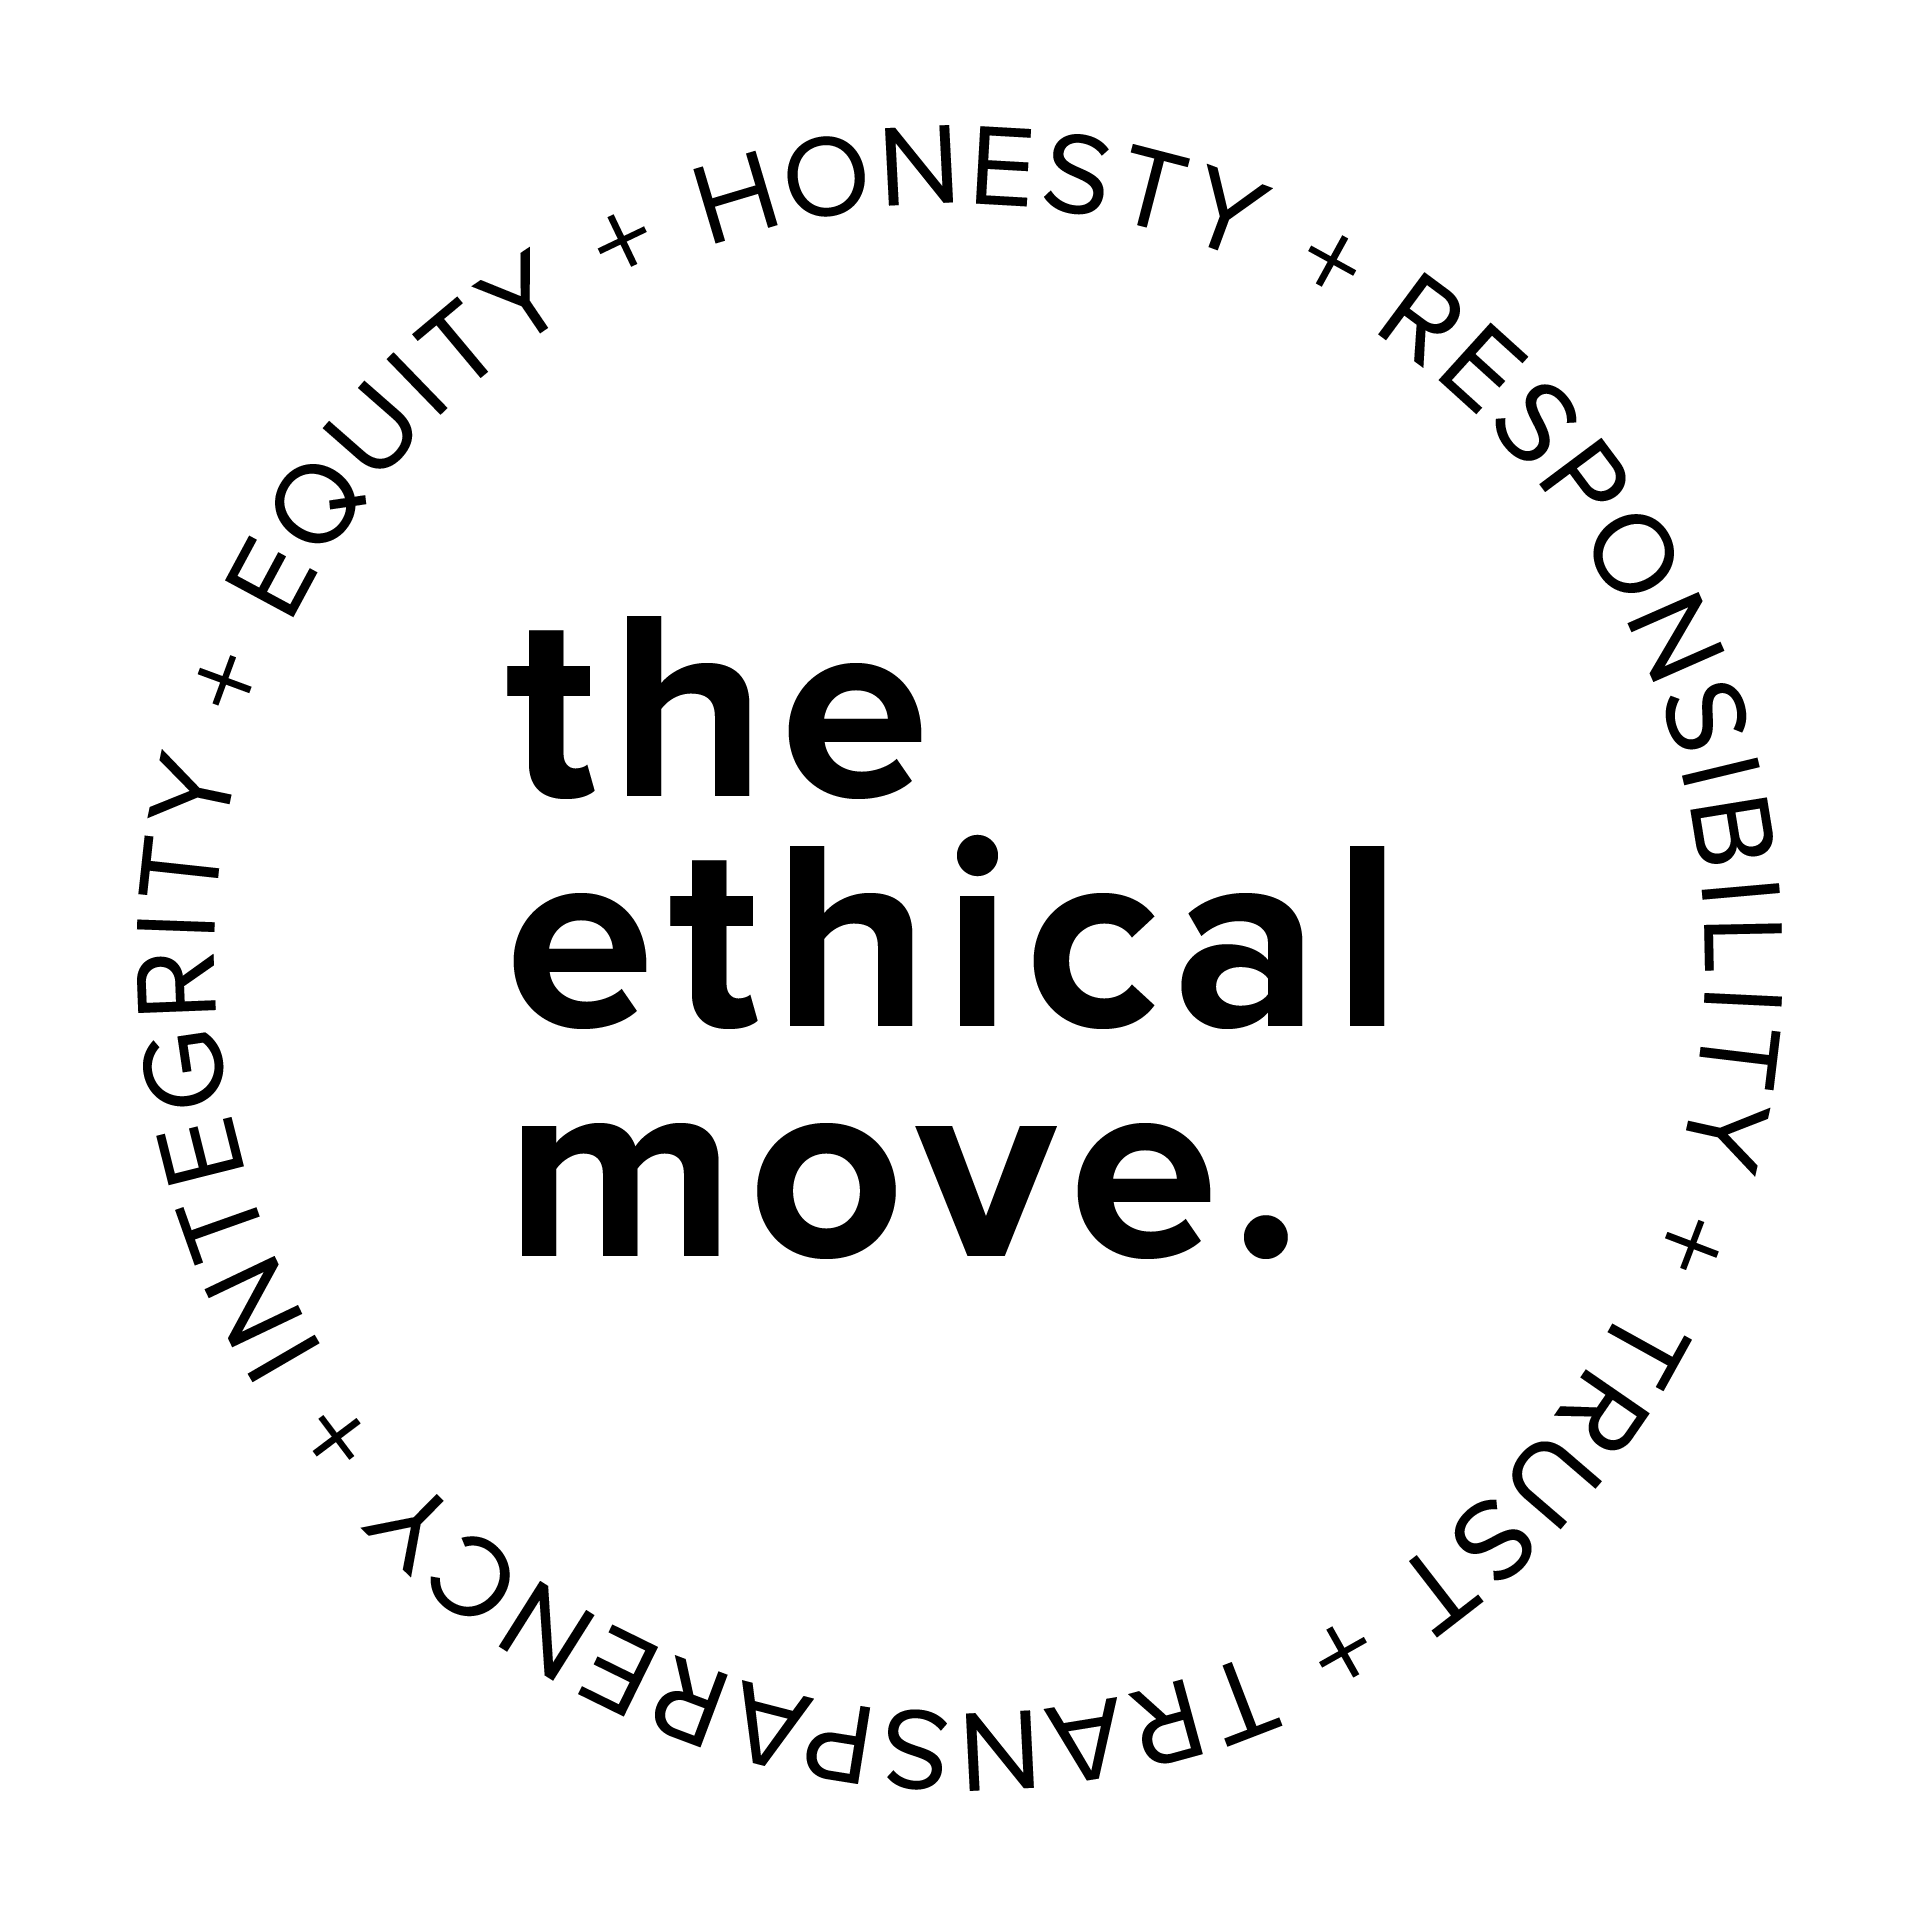 The ethical values